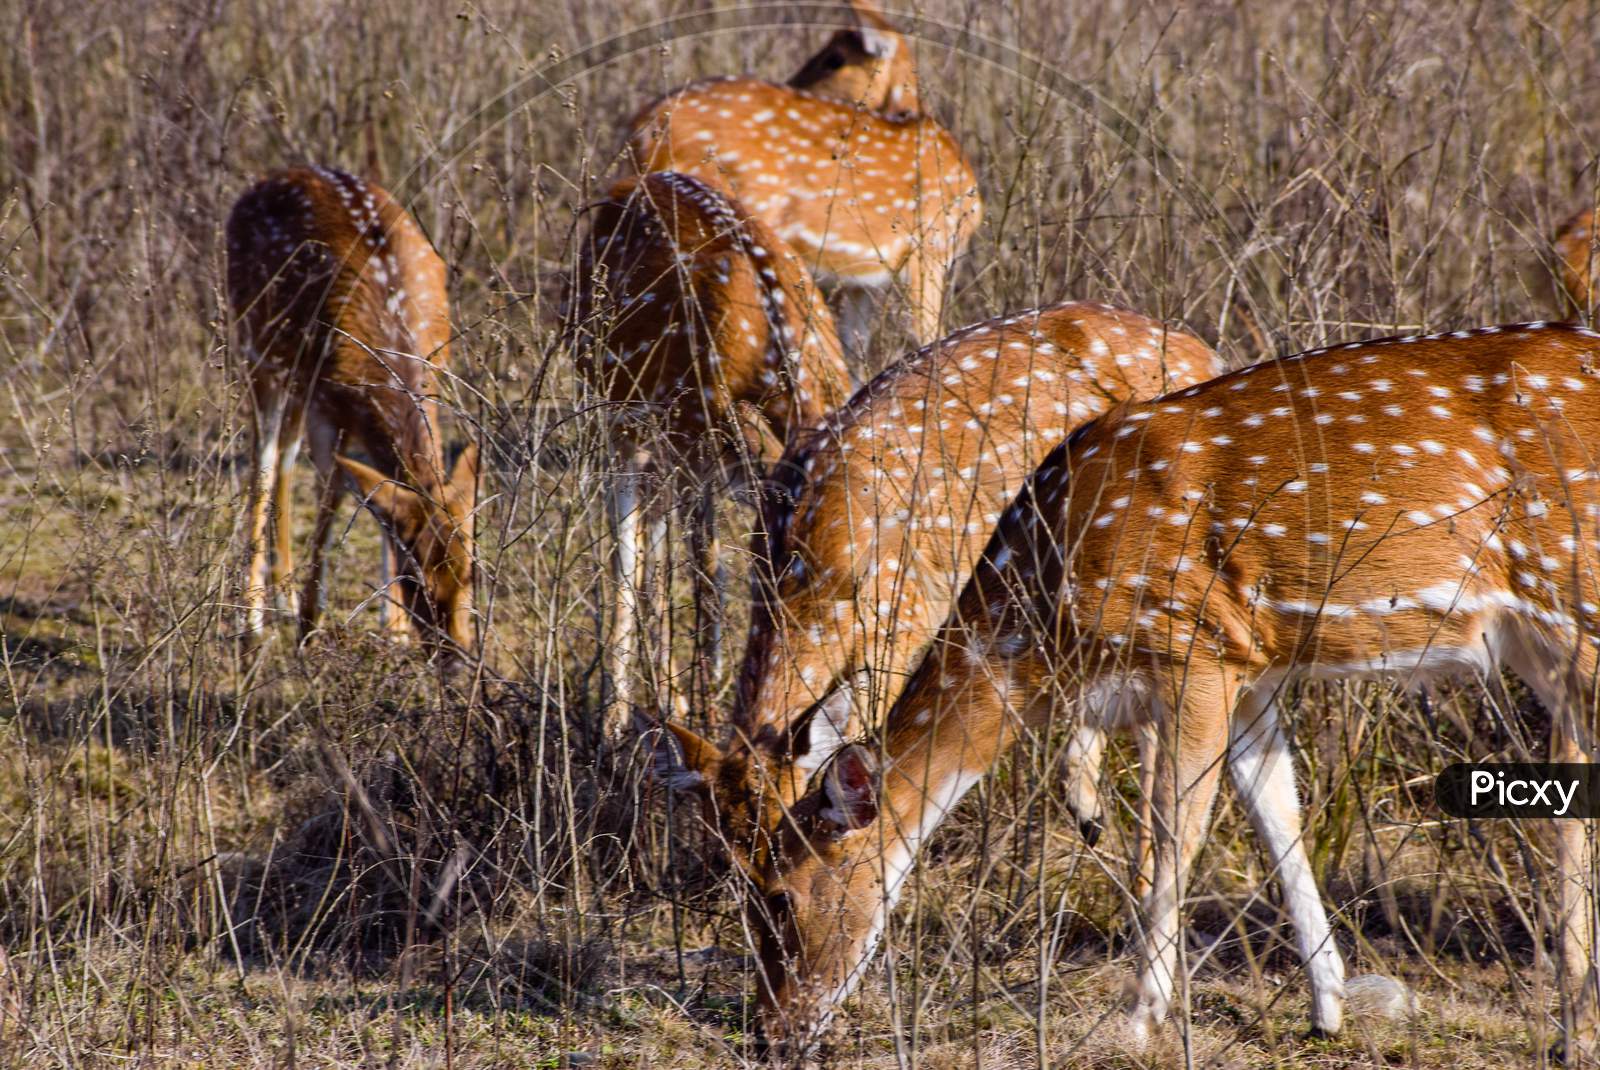 Deer Family grazing in the Jungle Grassland